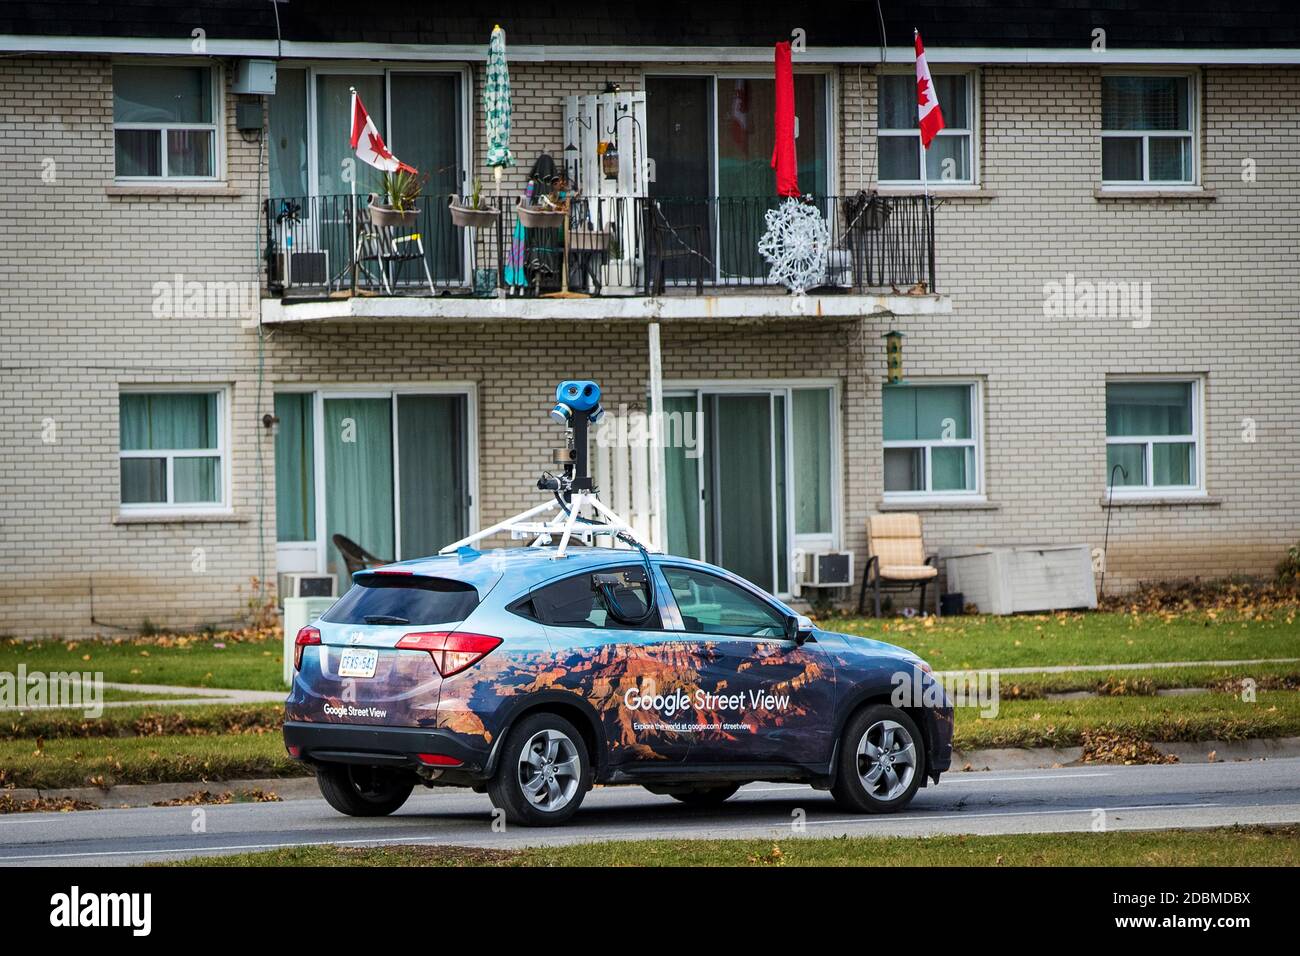 Google street view car with a 360 camera attached to the top in Kingston, Ontario on Tuesday, November 17, 2020. Stock Photo